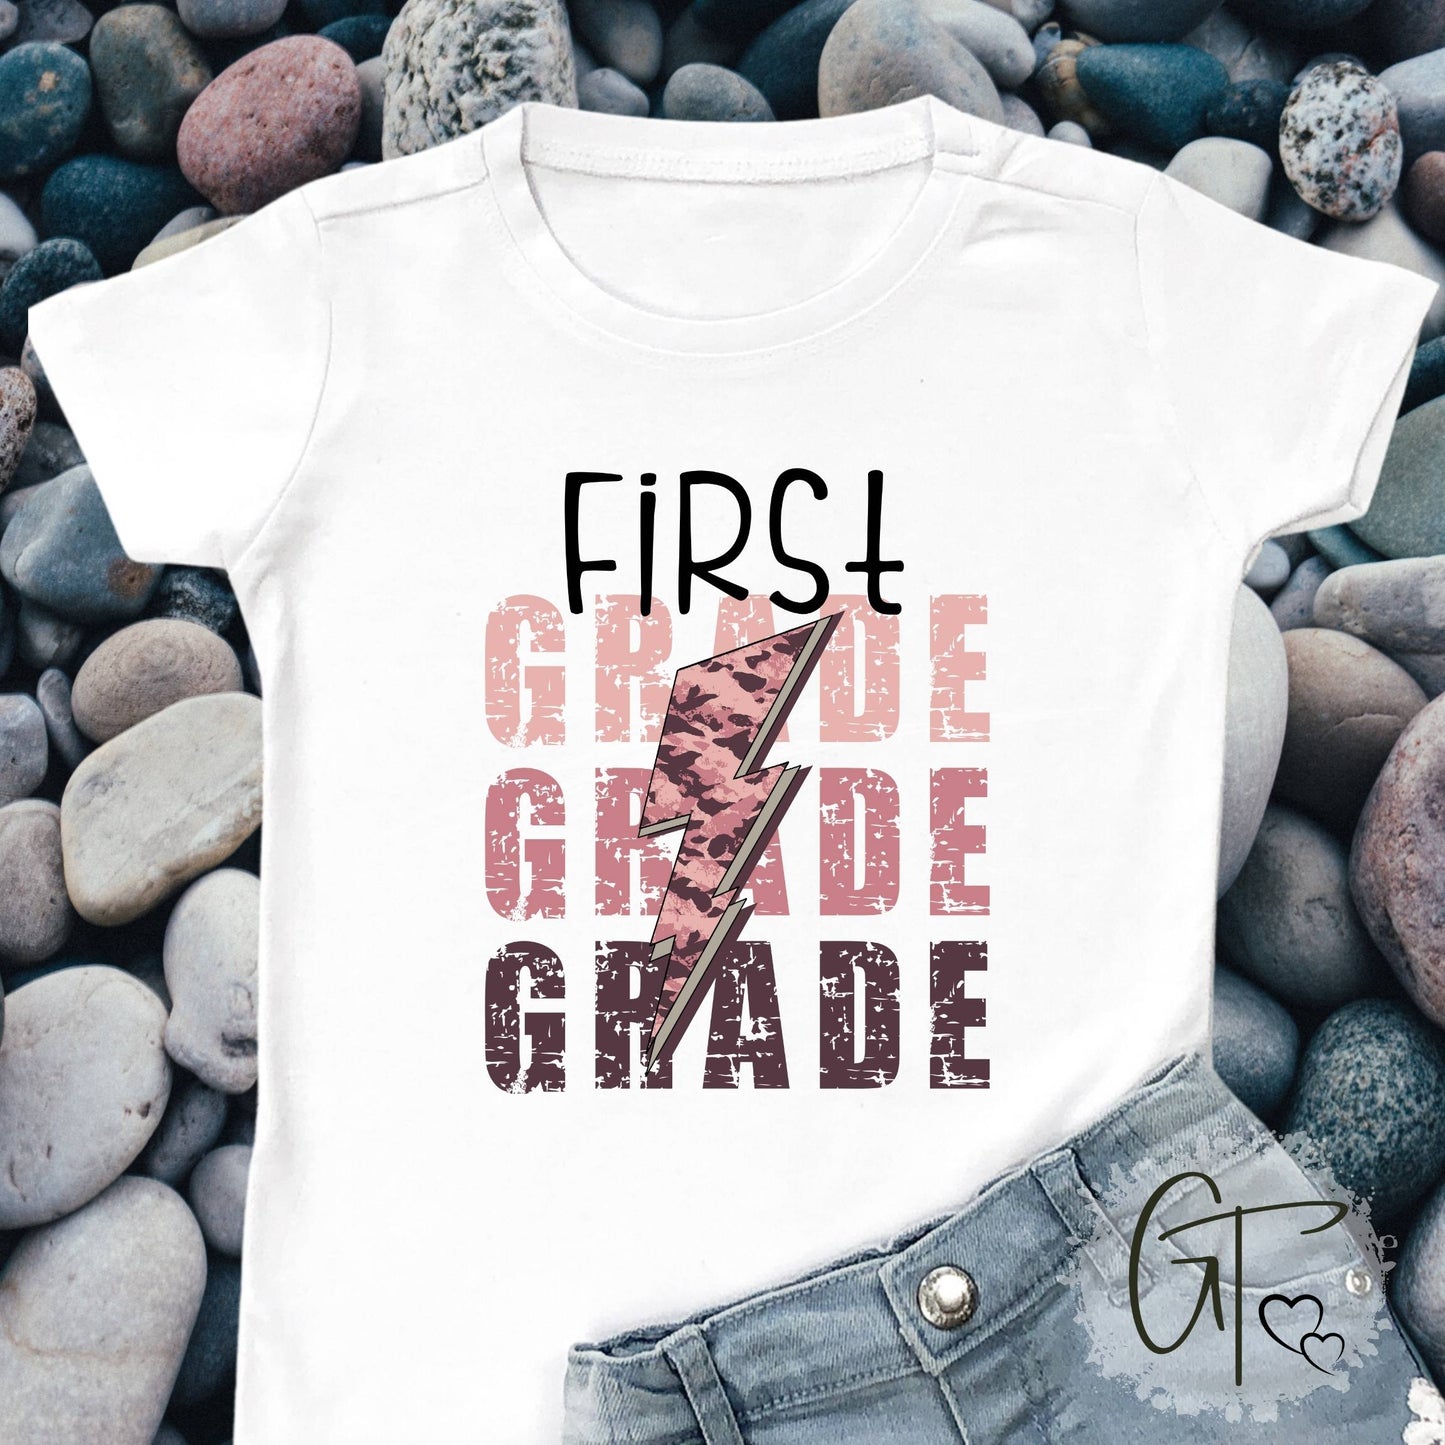 Back to School Sublimation Transfer